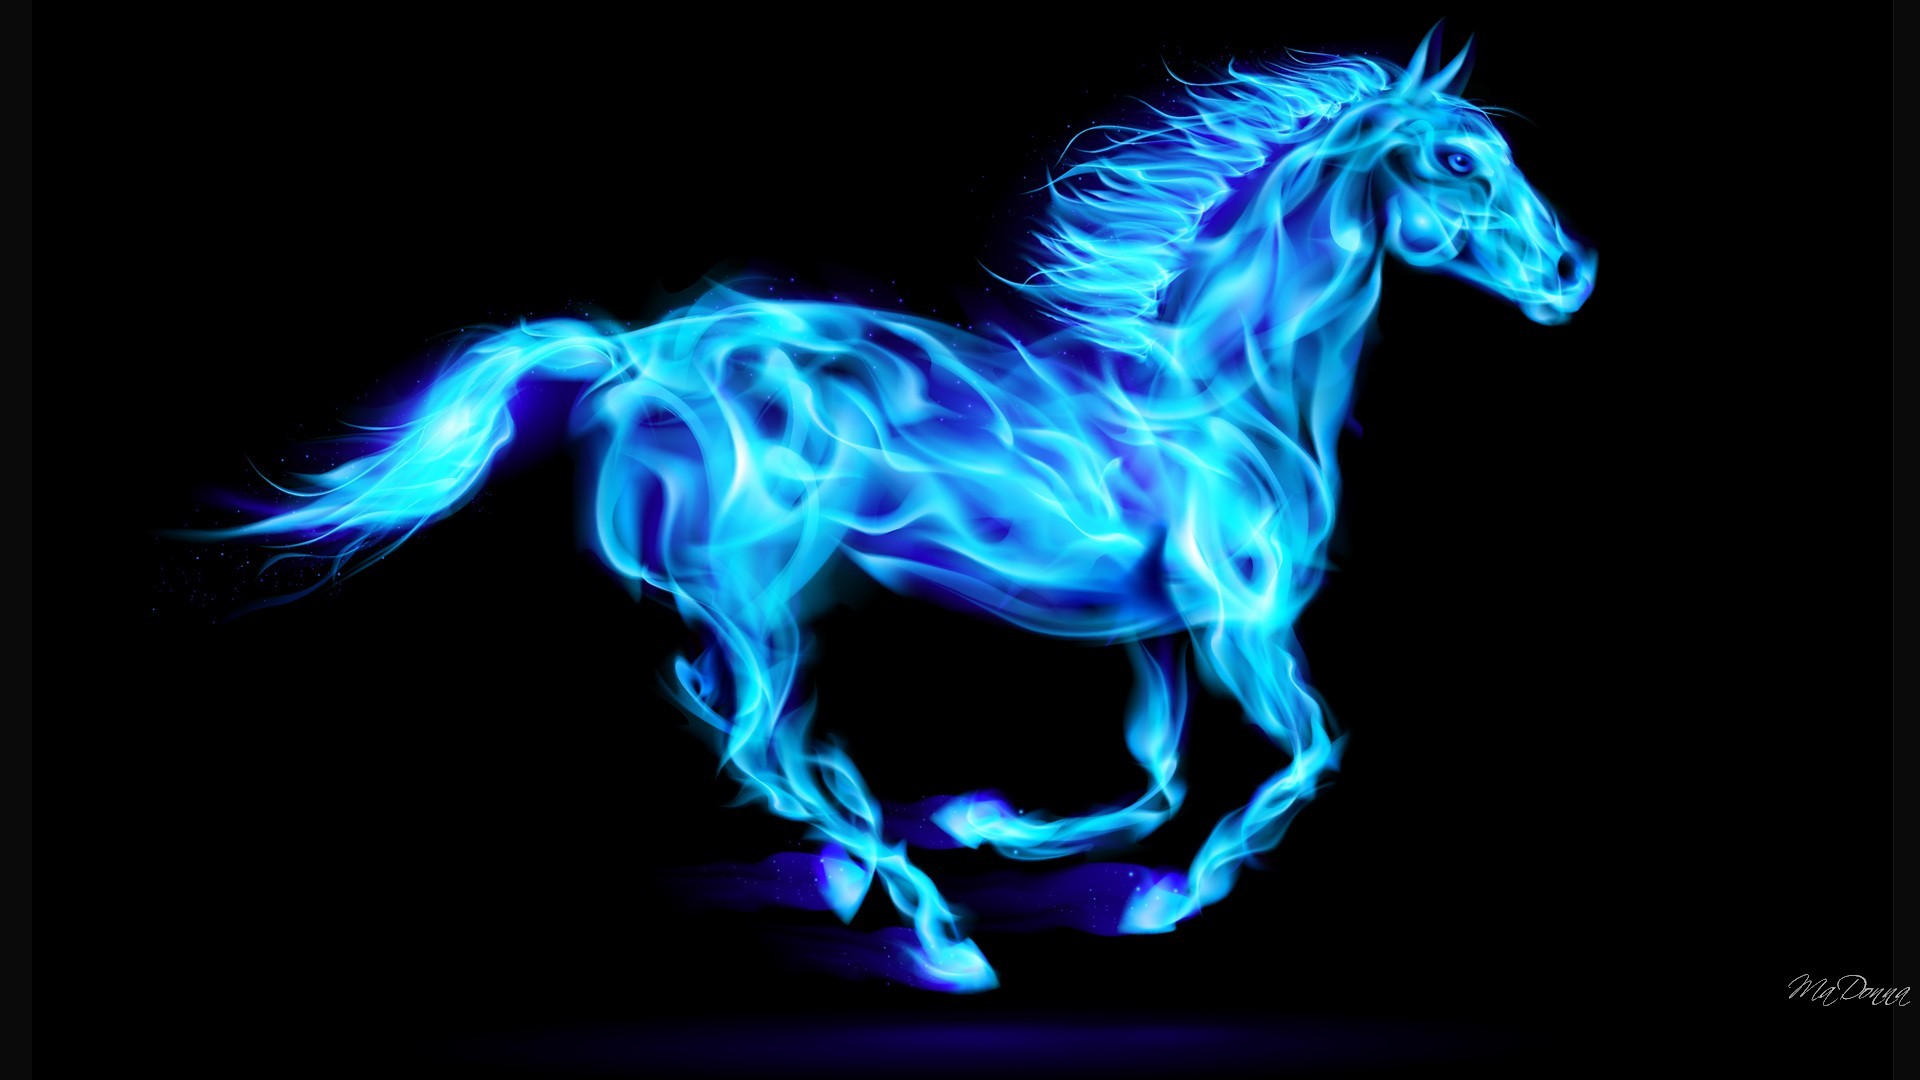 Cool Horse Backgrounds - Wallpaper Zone